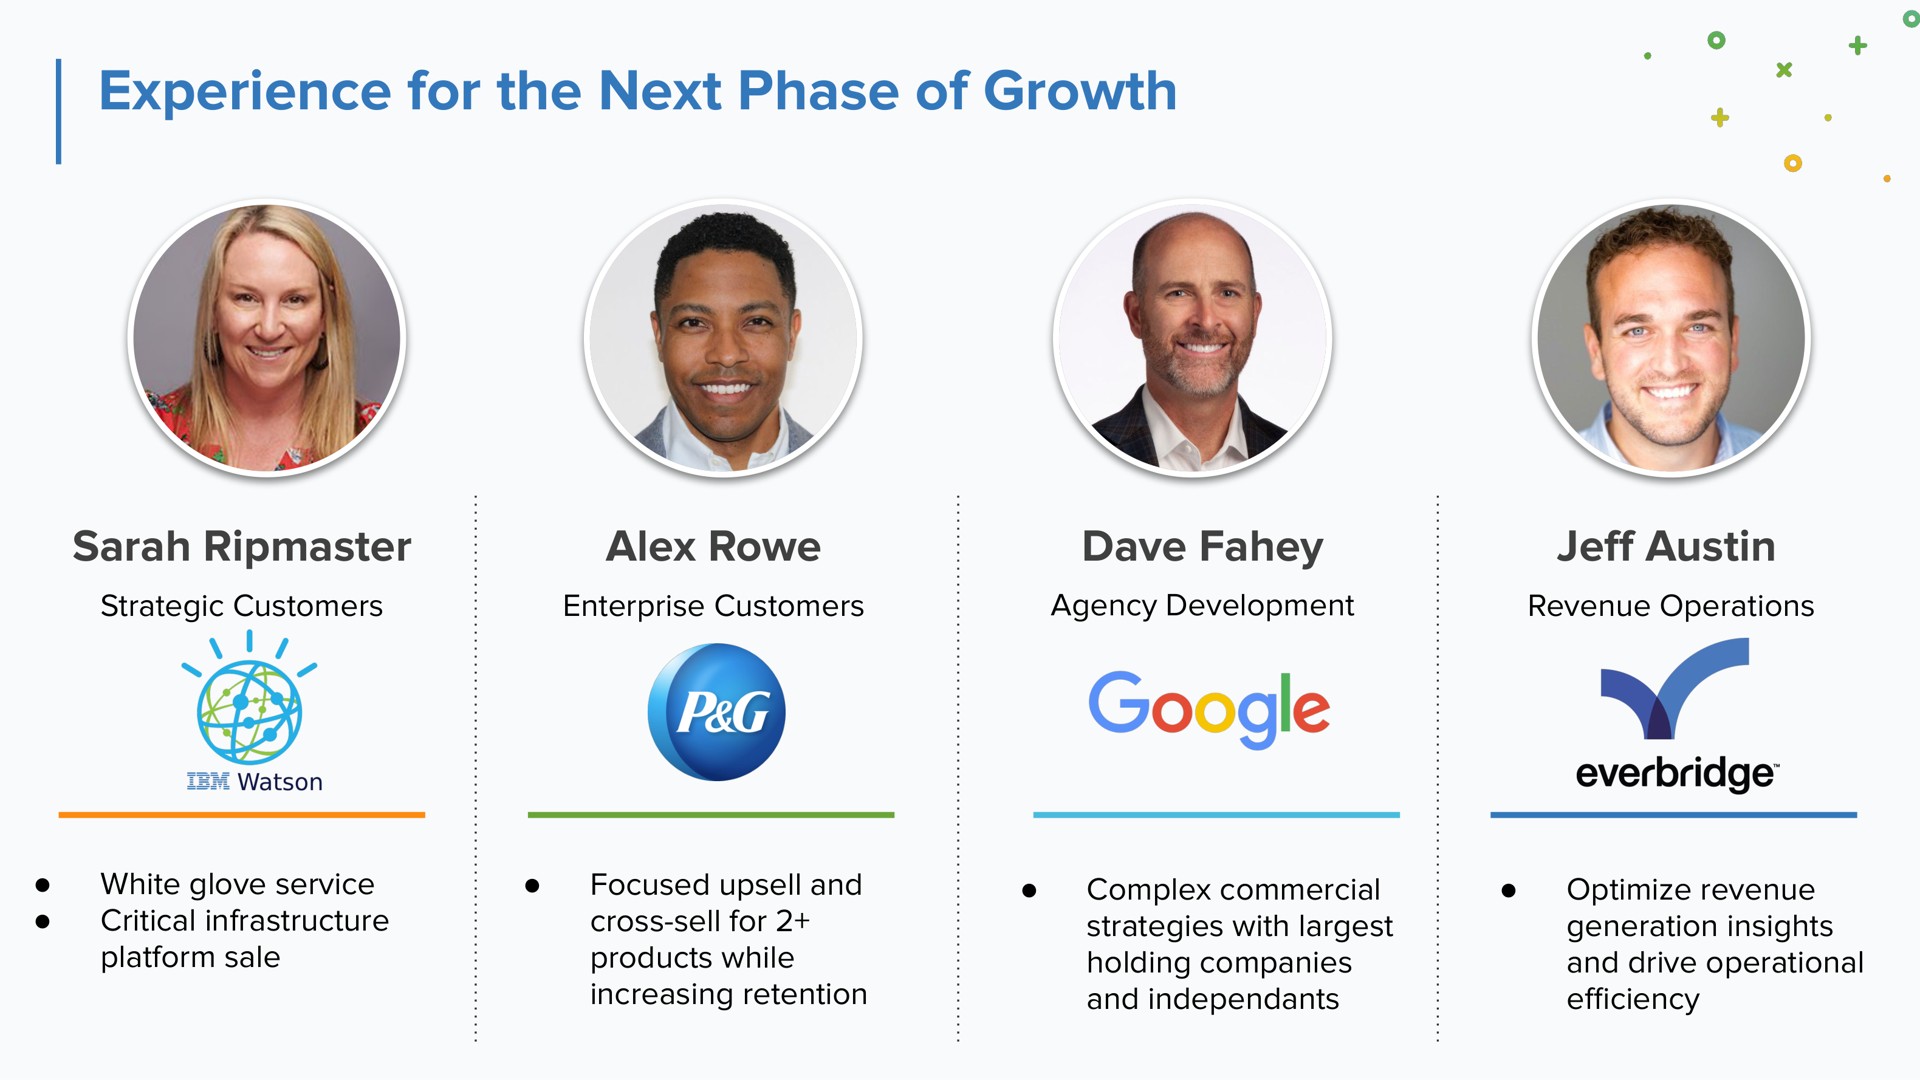 experience for the next phase of growth | Innovid